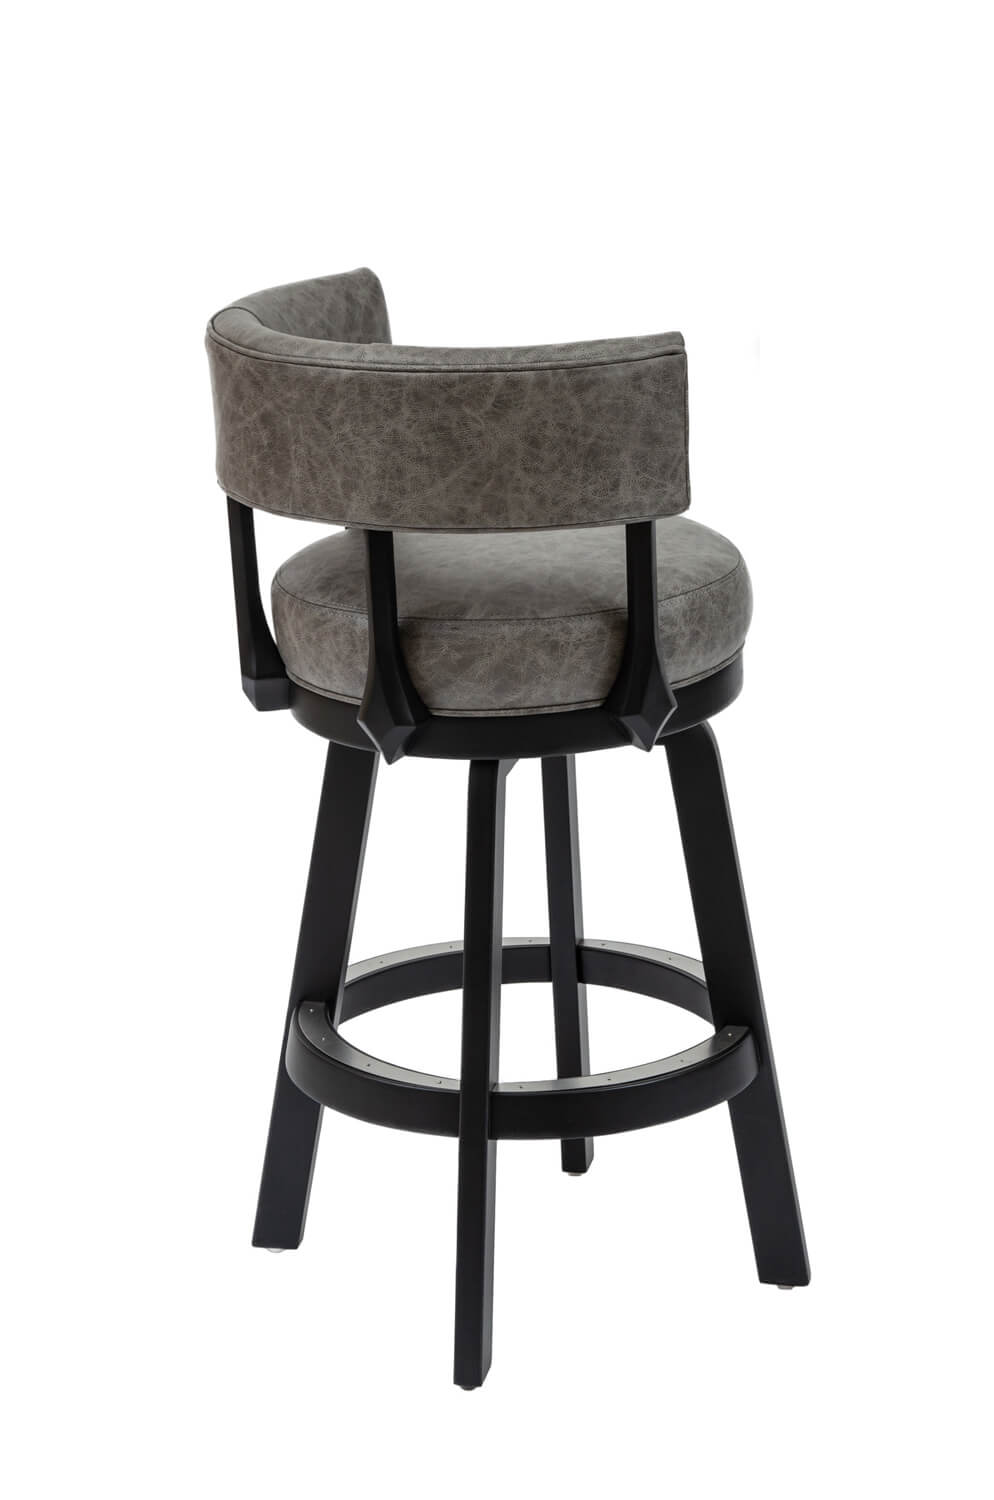 Commercial Swivel Bar Stools With Back, Black Leather Swivel Bar Stools With Arms